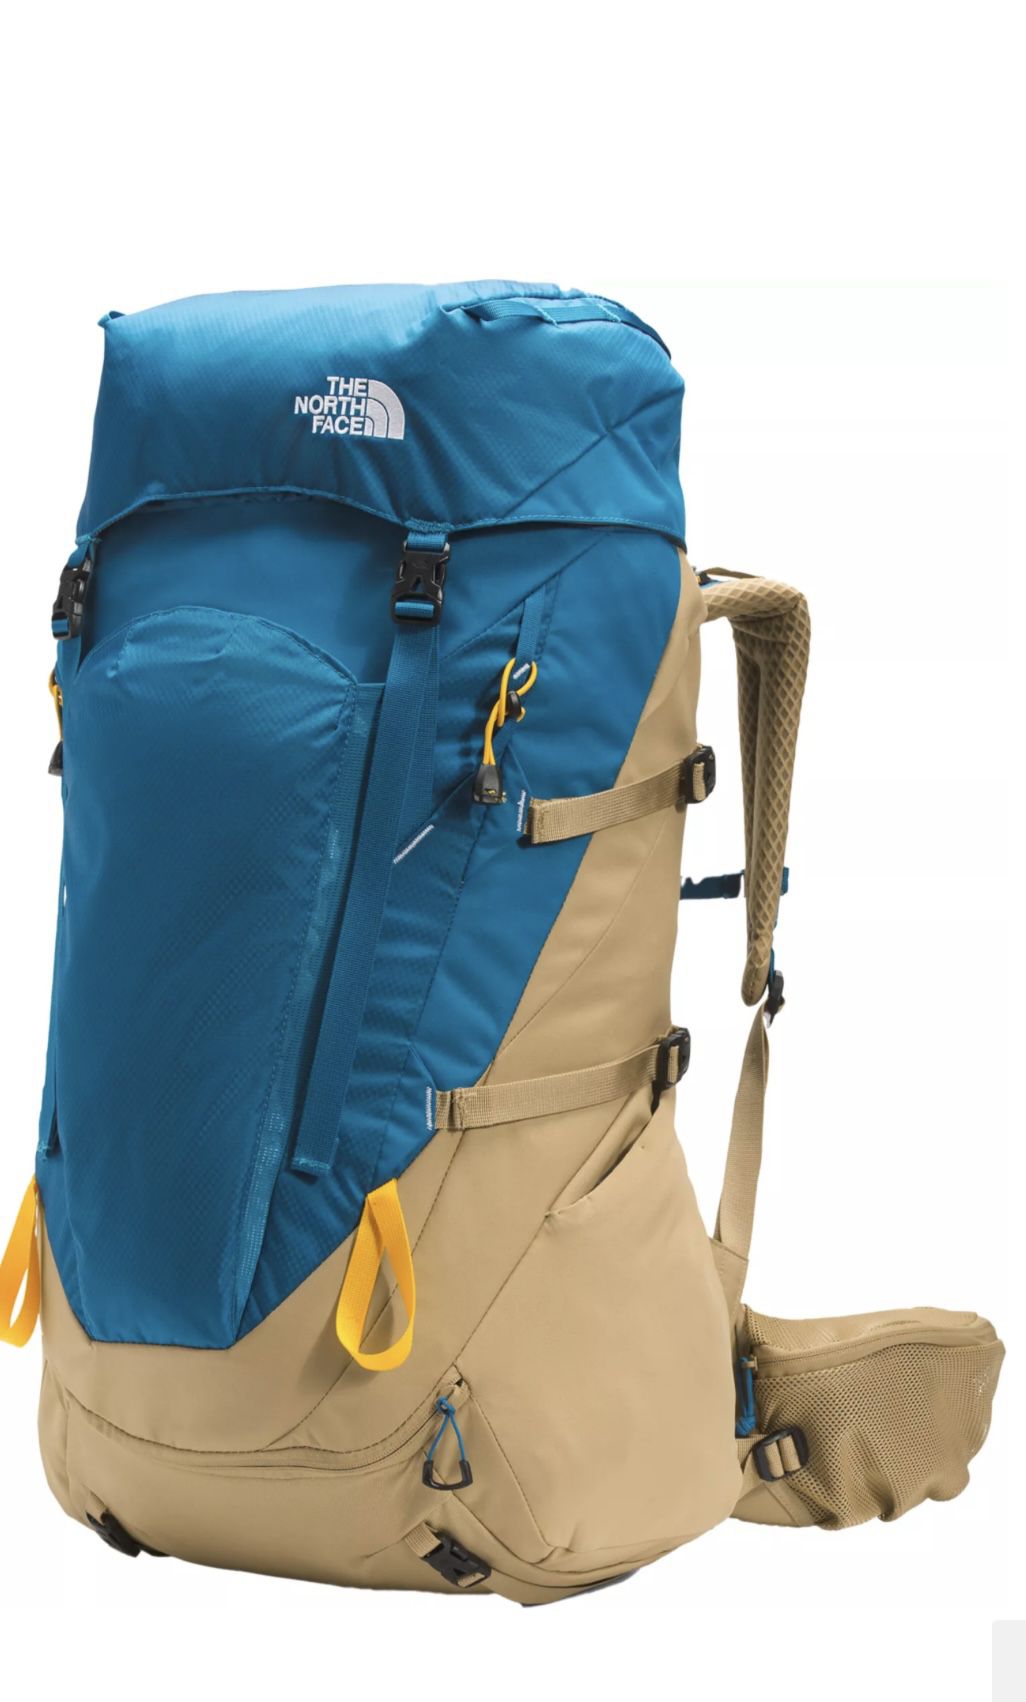 The North Face BACKPACK 